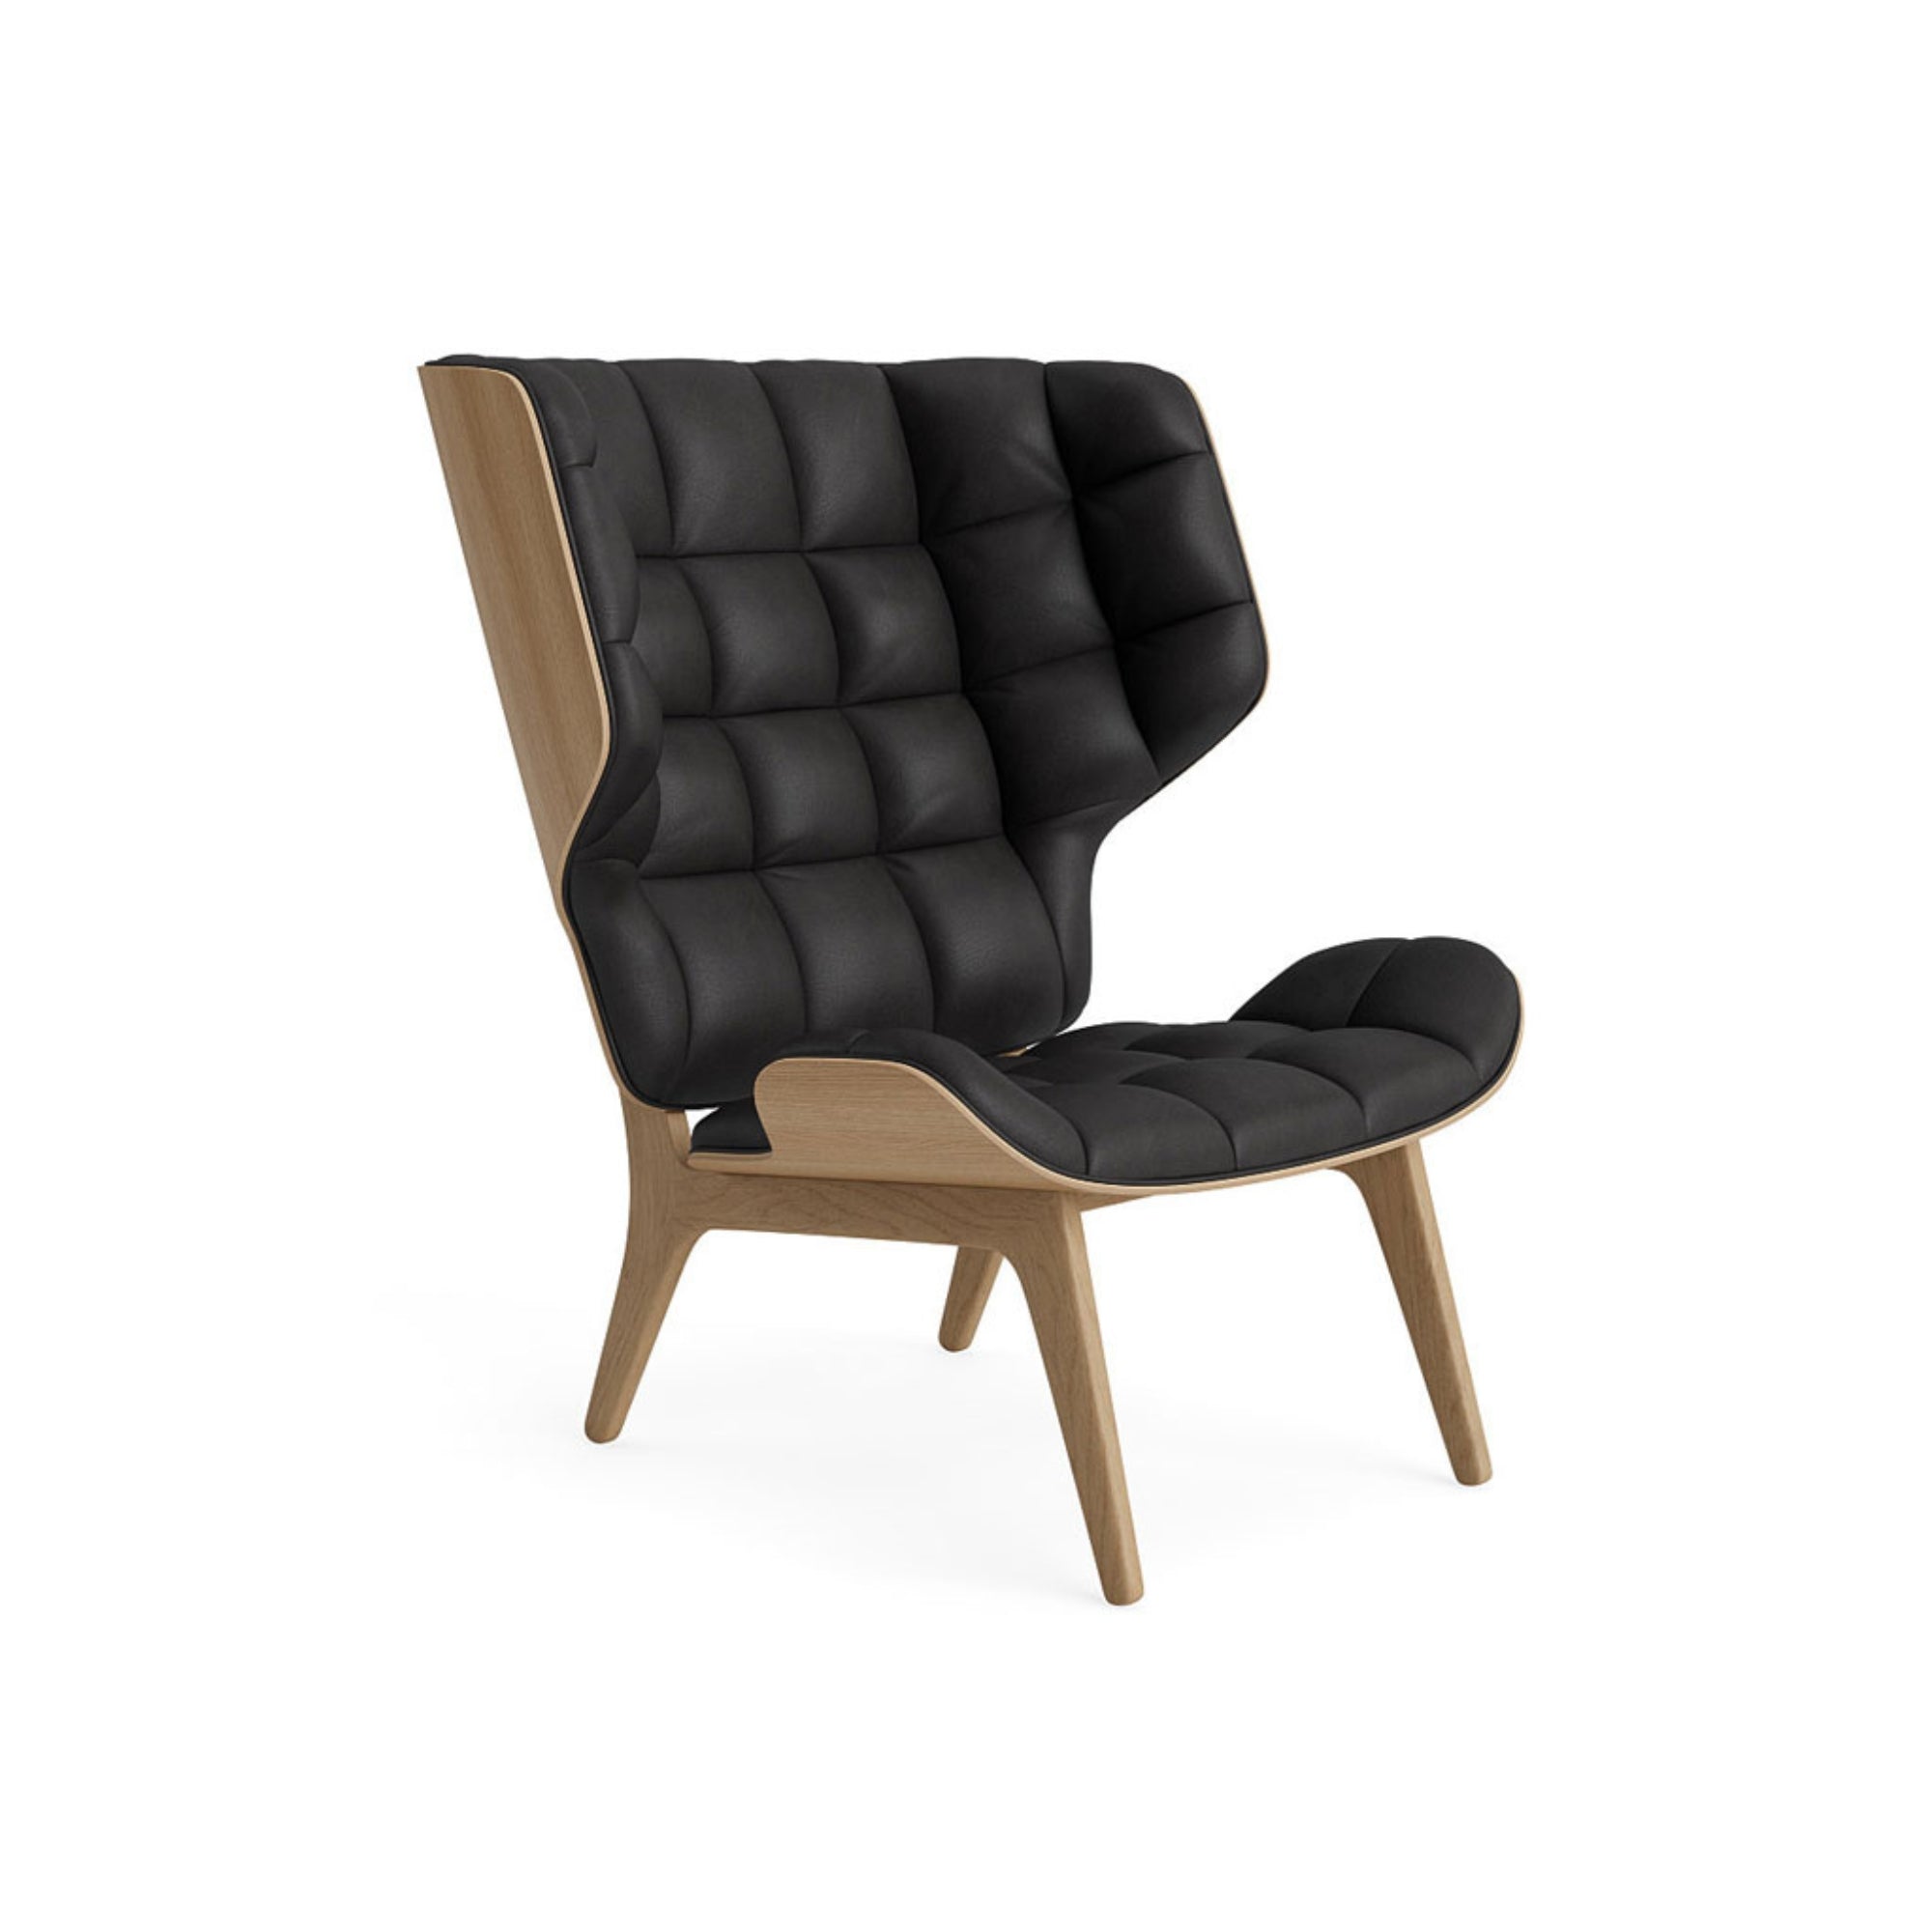 Mammoth Chair - Leather - THAT COOL LIVING